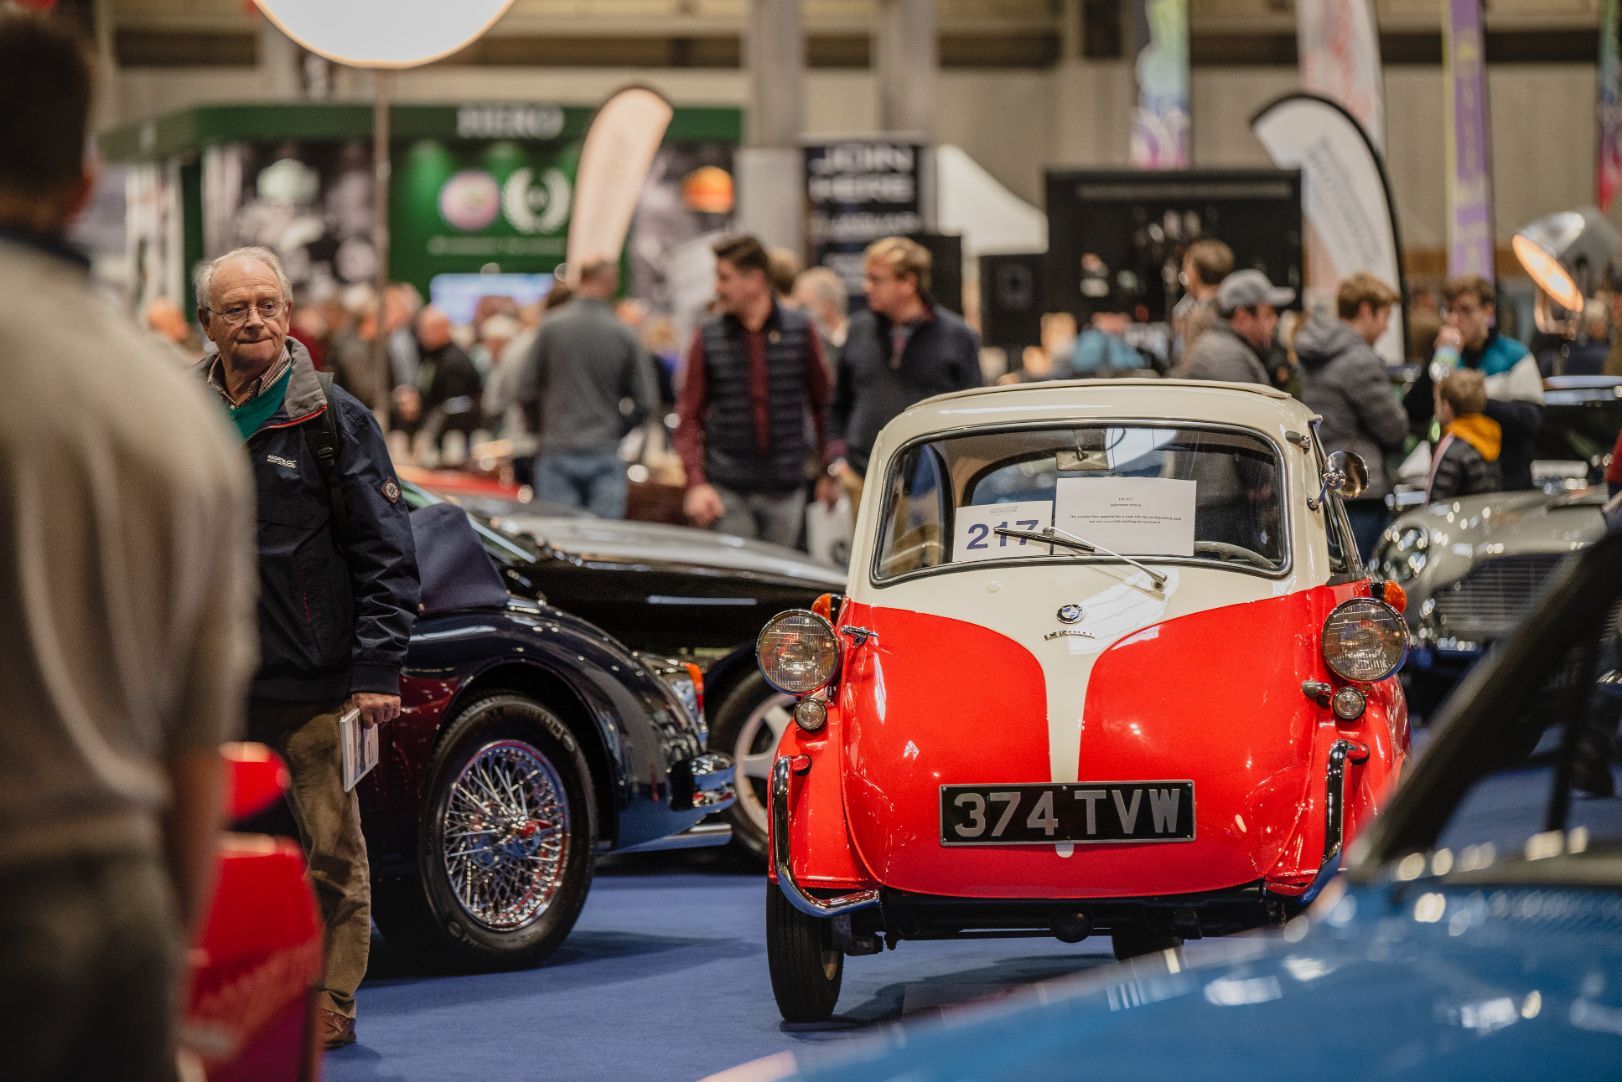 What to see and do at the 2021 Classic Motor Show